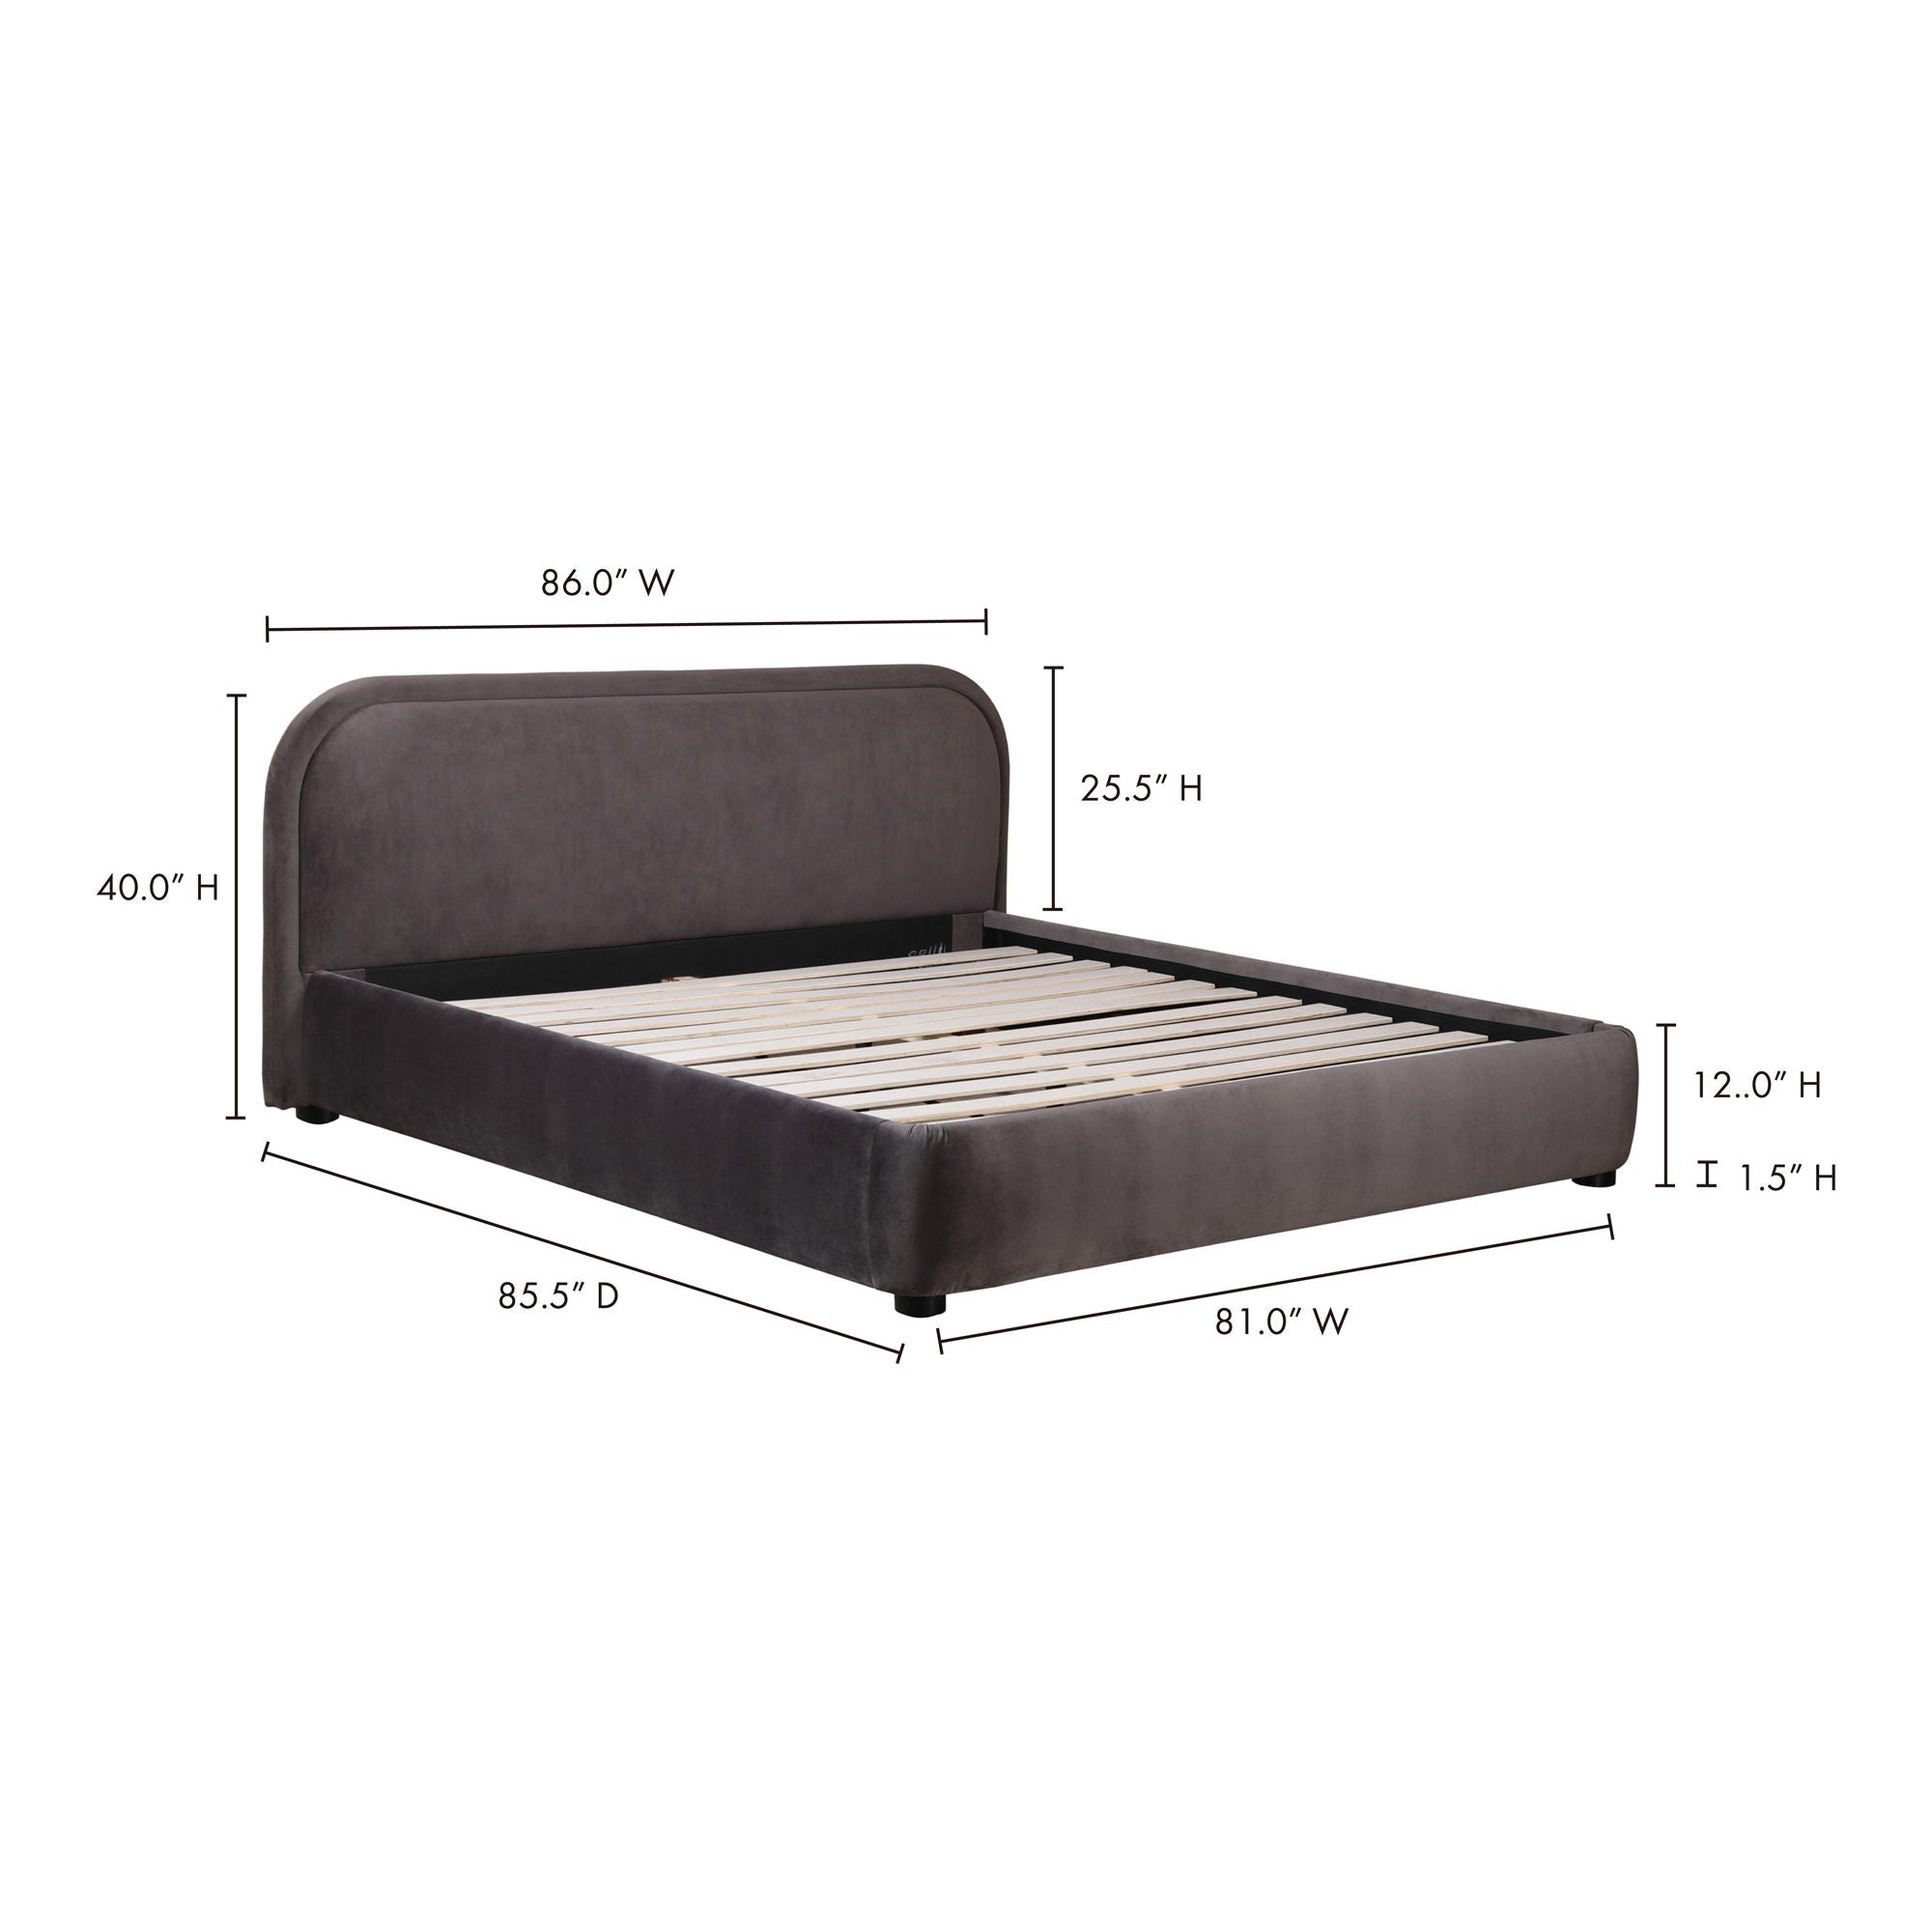 Colin - King Bed - Charcoal